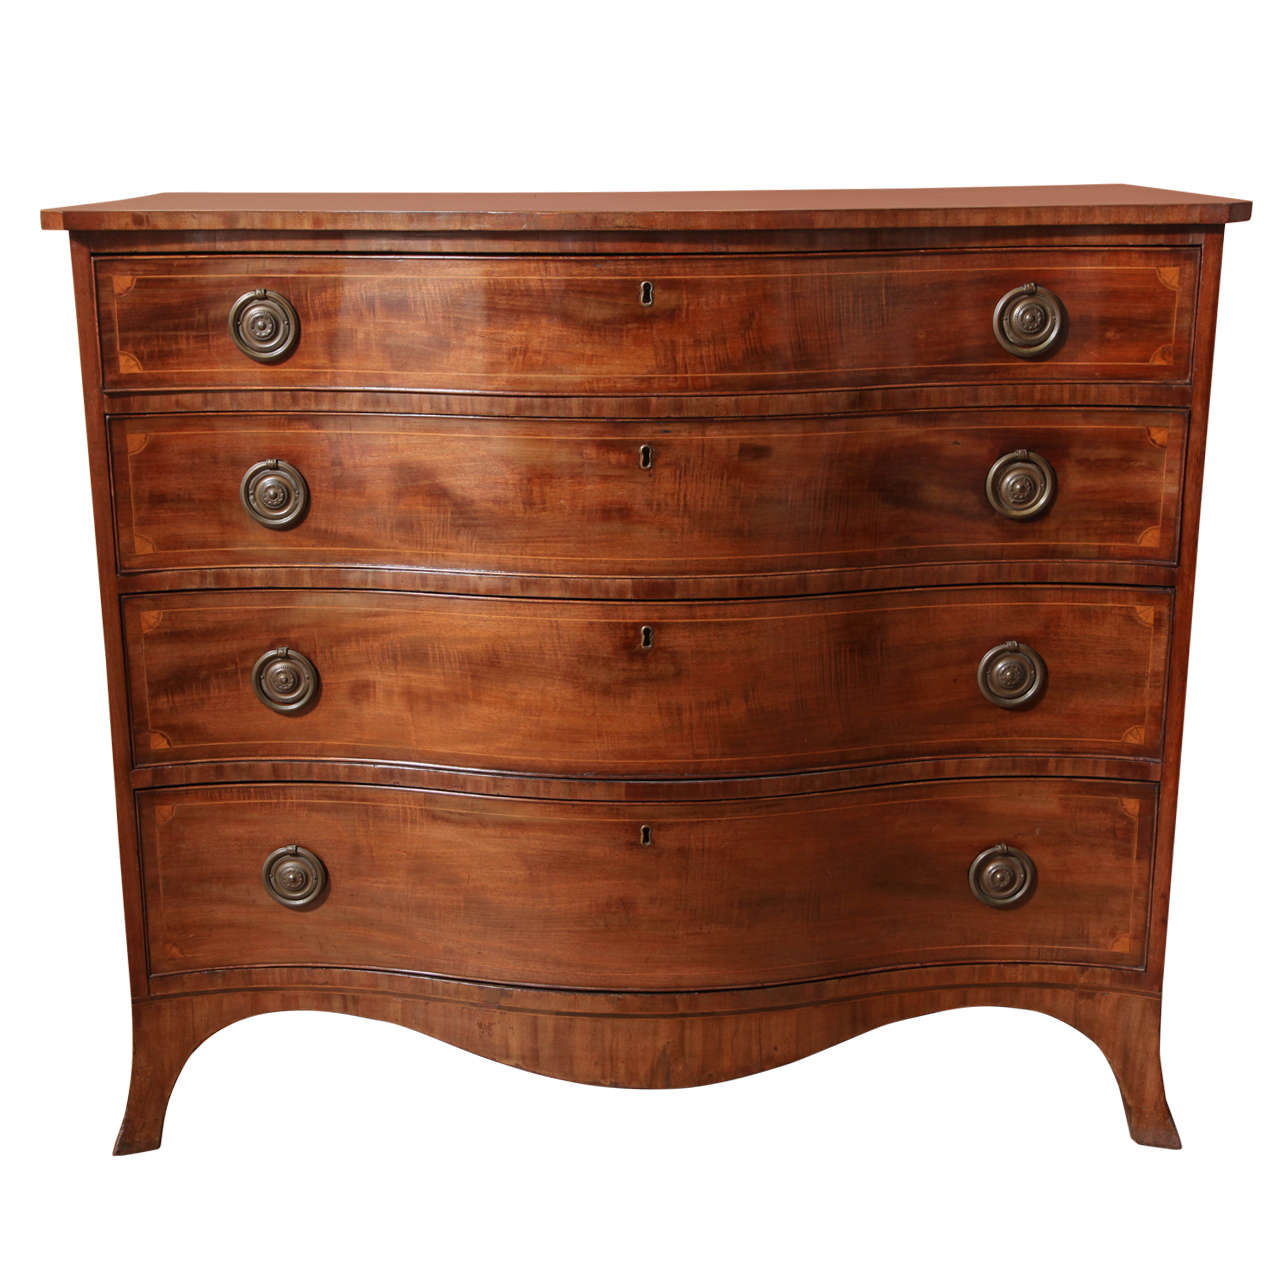 Hepplewhite Four-Drawer Chest in Mahogany with Serpentine Front, circa 1800